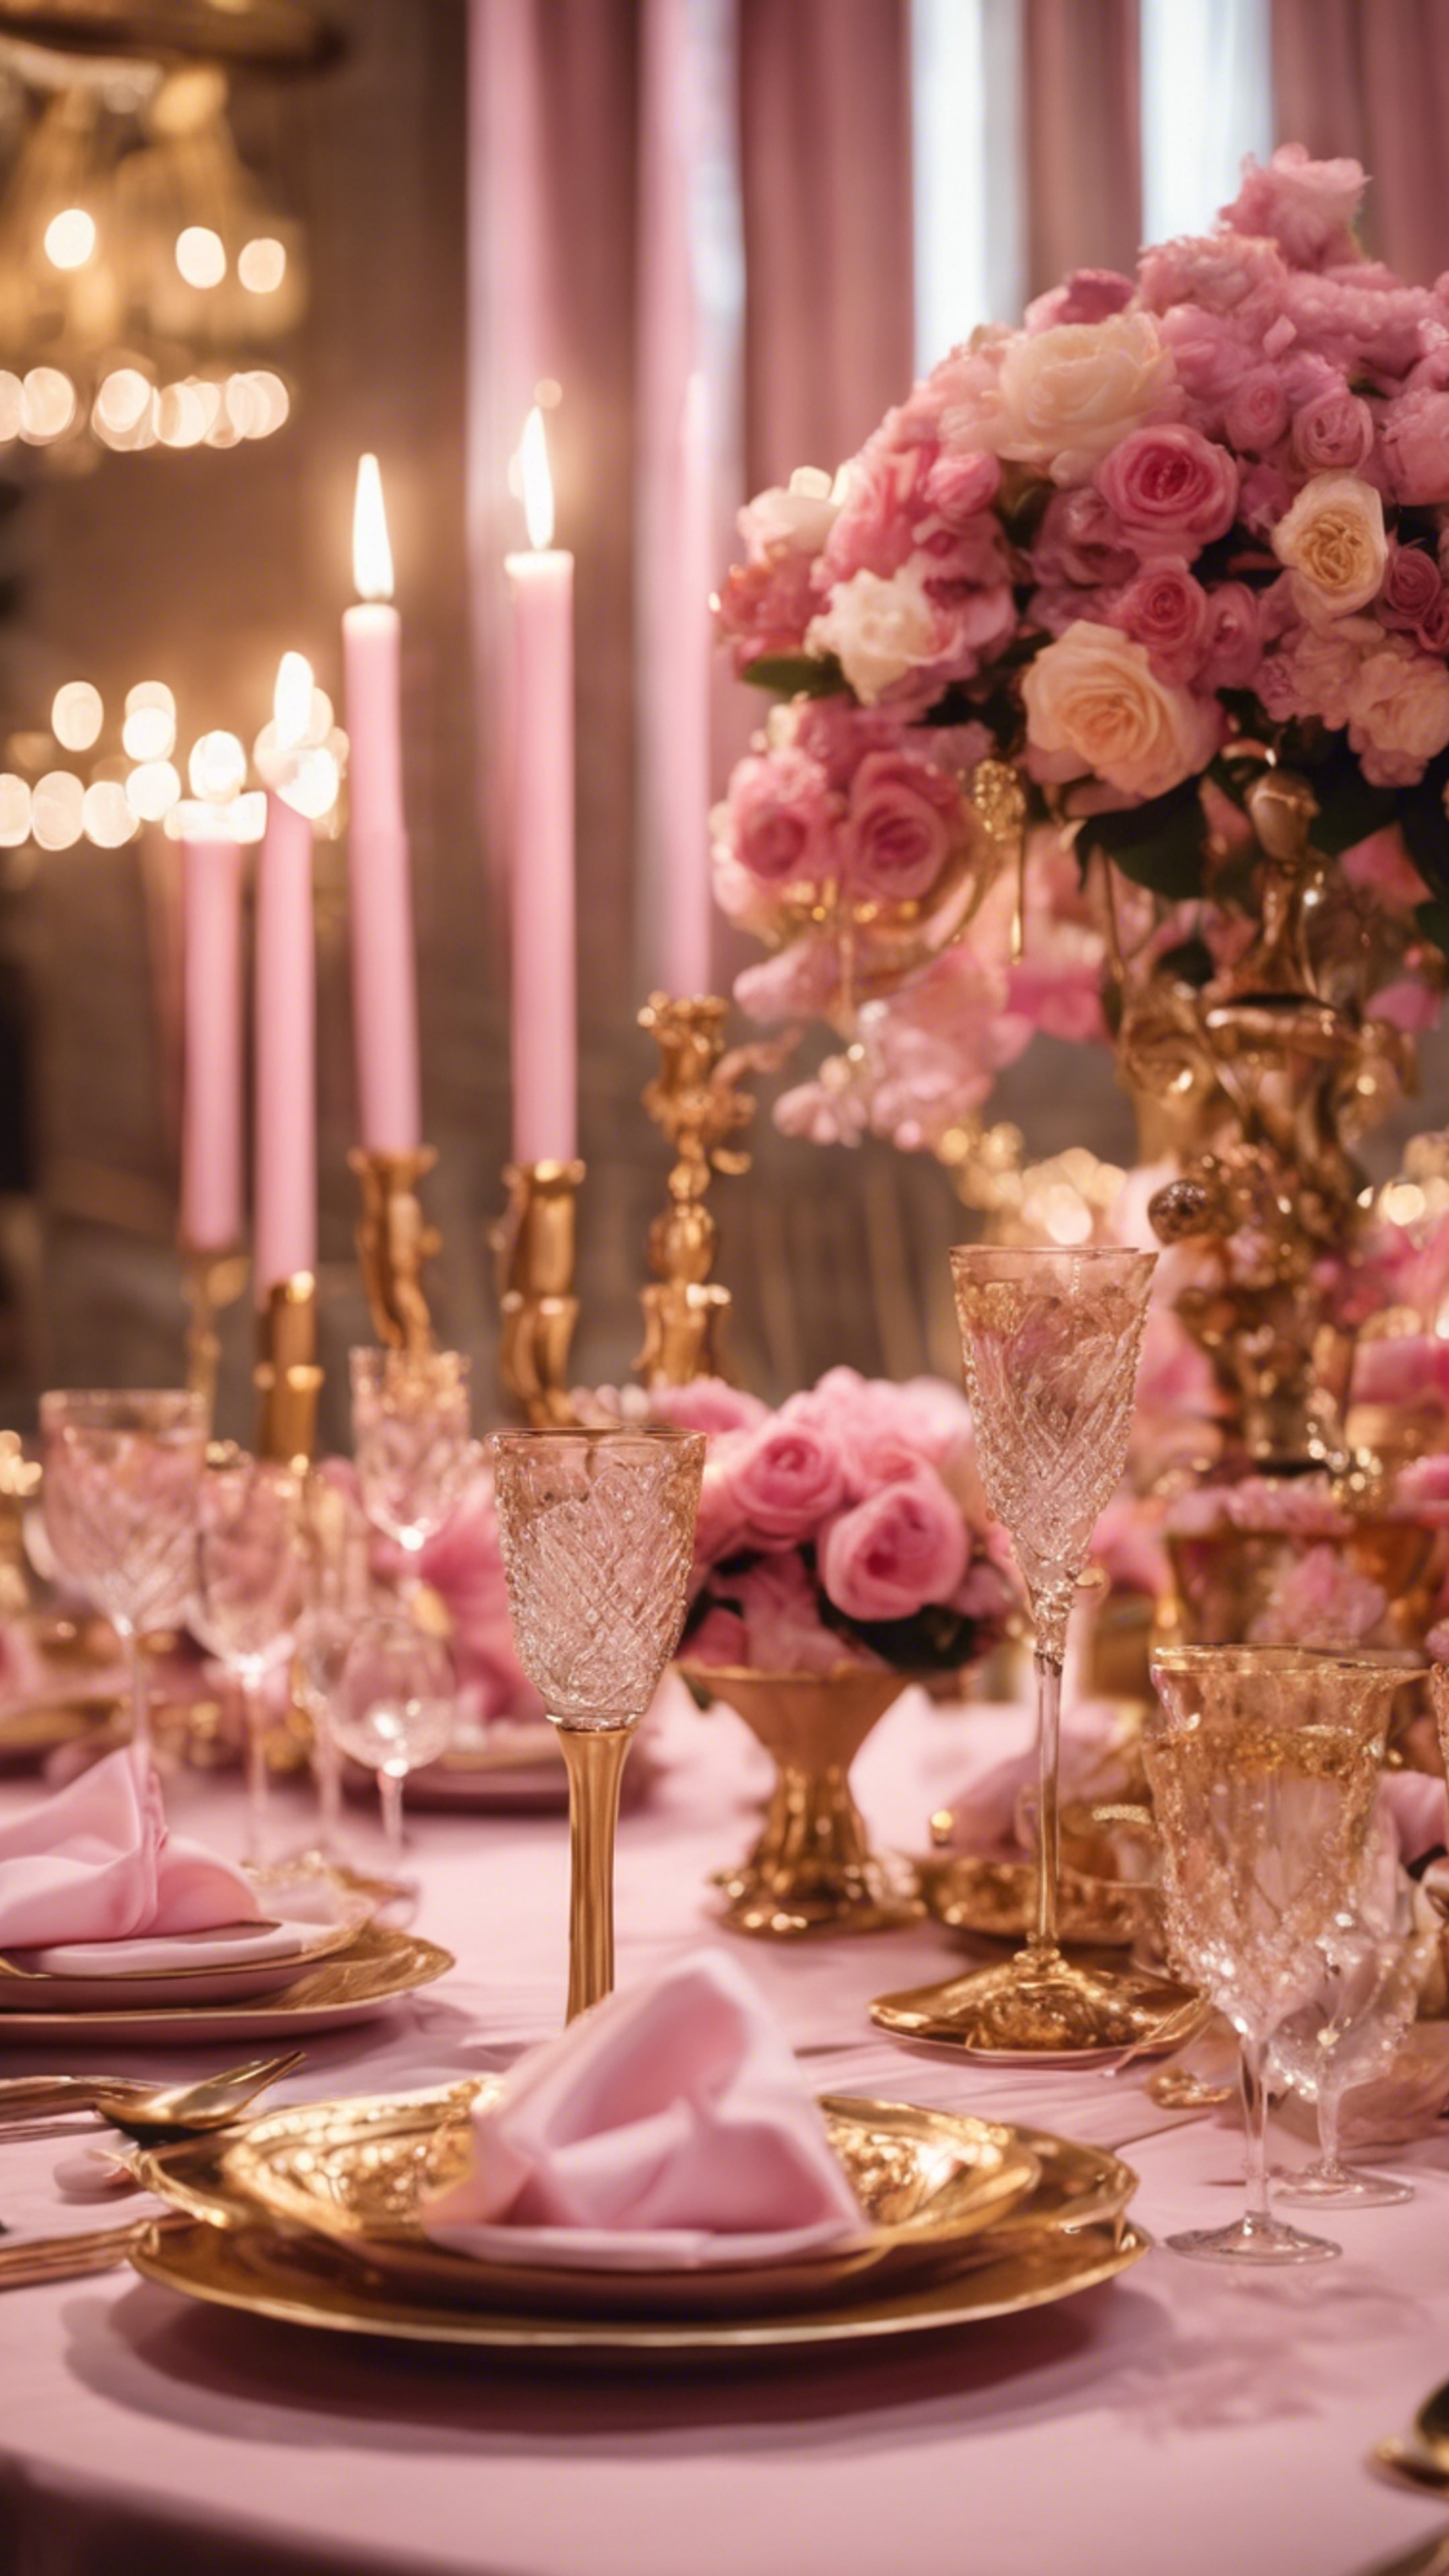 An elegant pink and gold-themed dining table set for an evening soiree. Wallpaper[a96f4c3be44f41948a30]